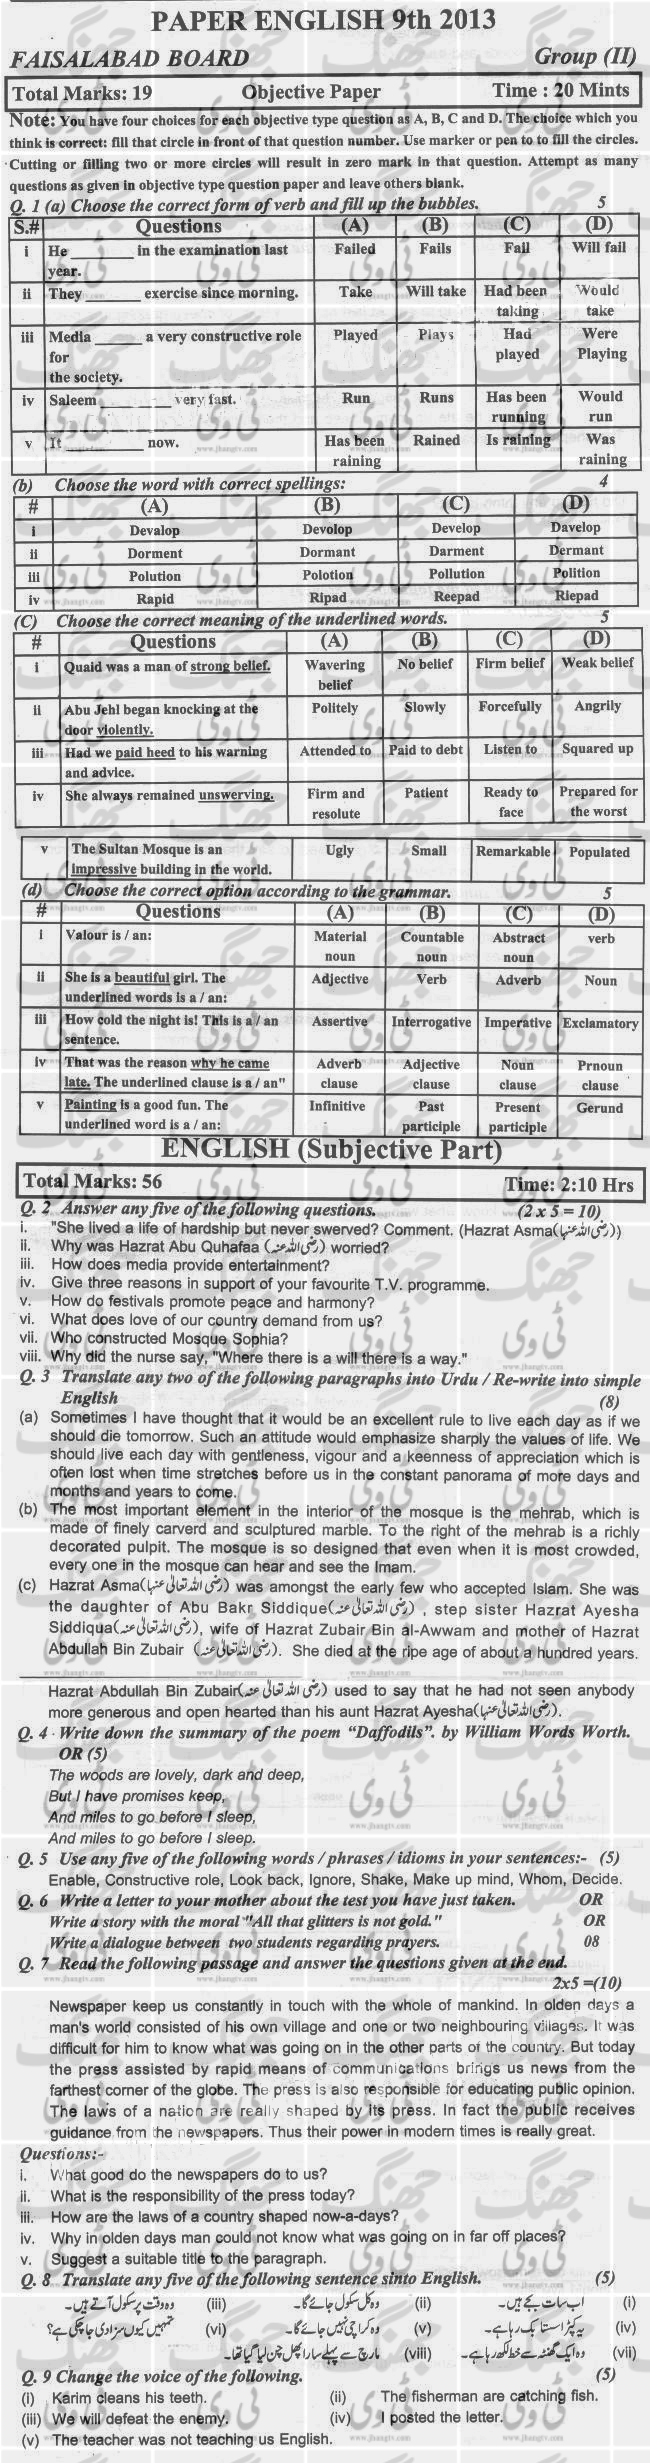 Past-Papers-2013-Faisalabad-Board-9th-Class-English-Group-2 copy